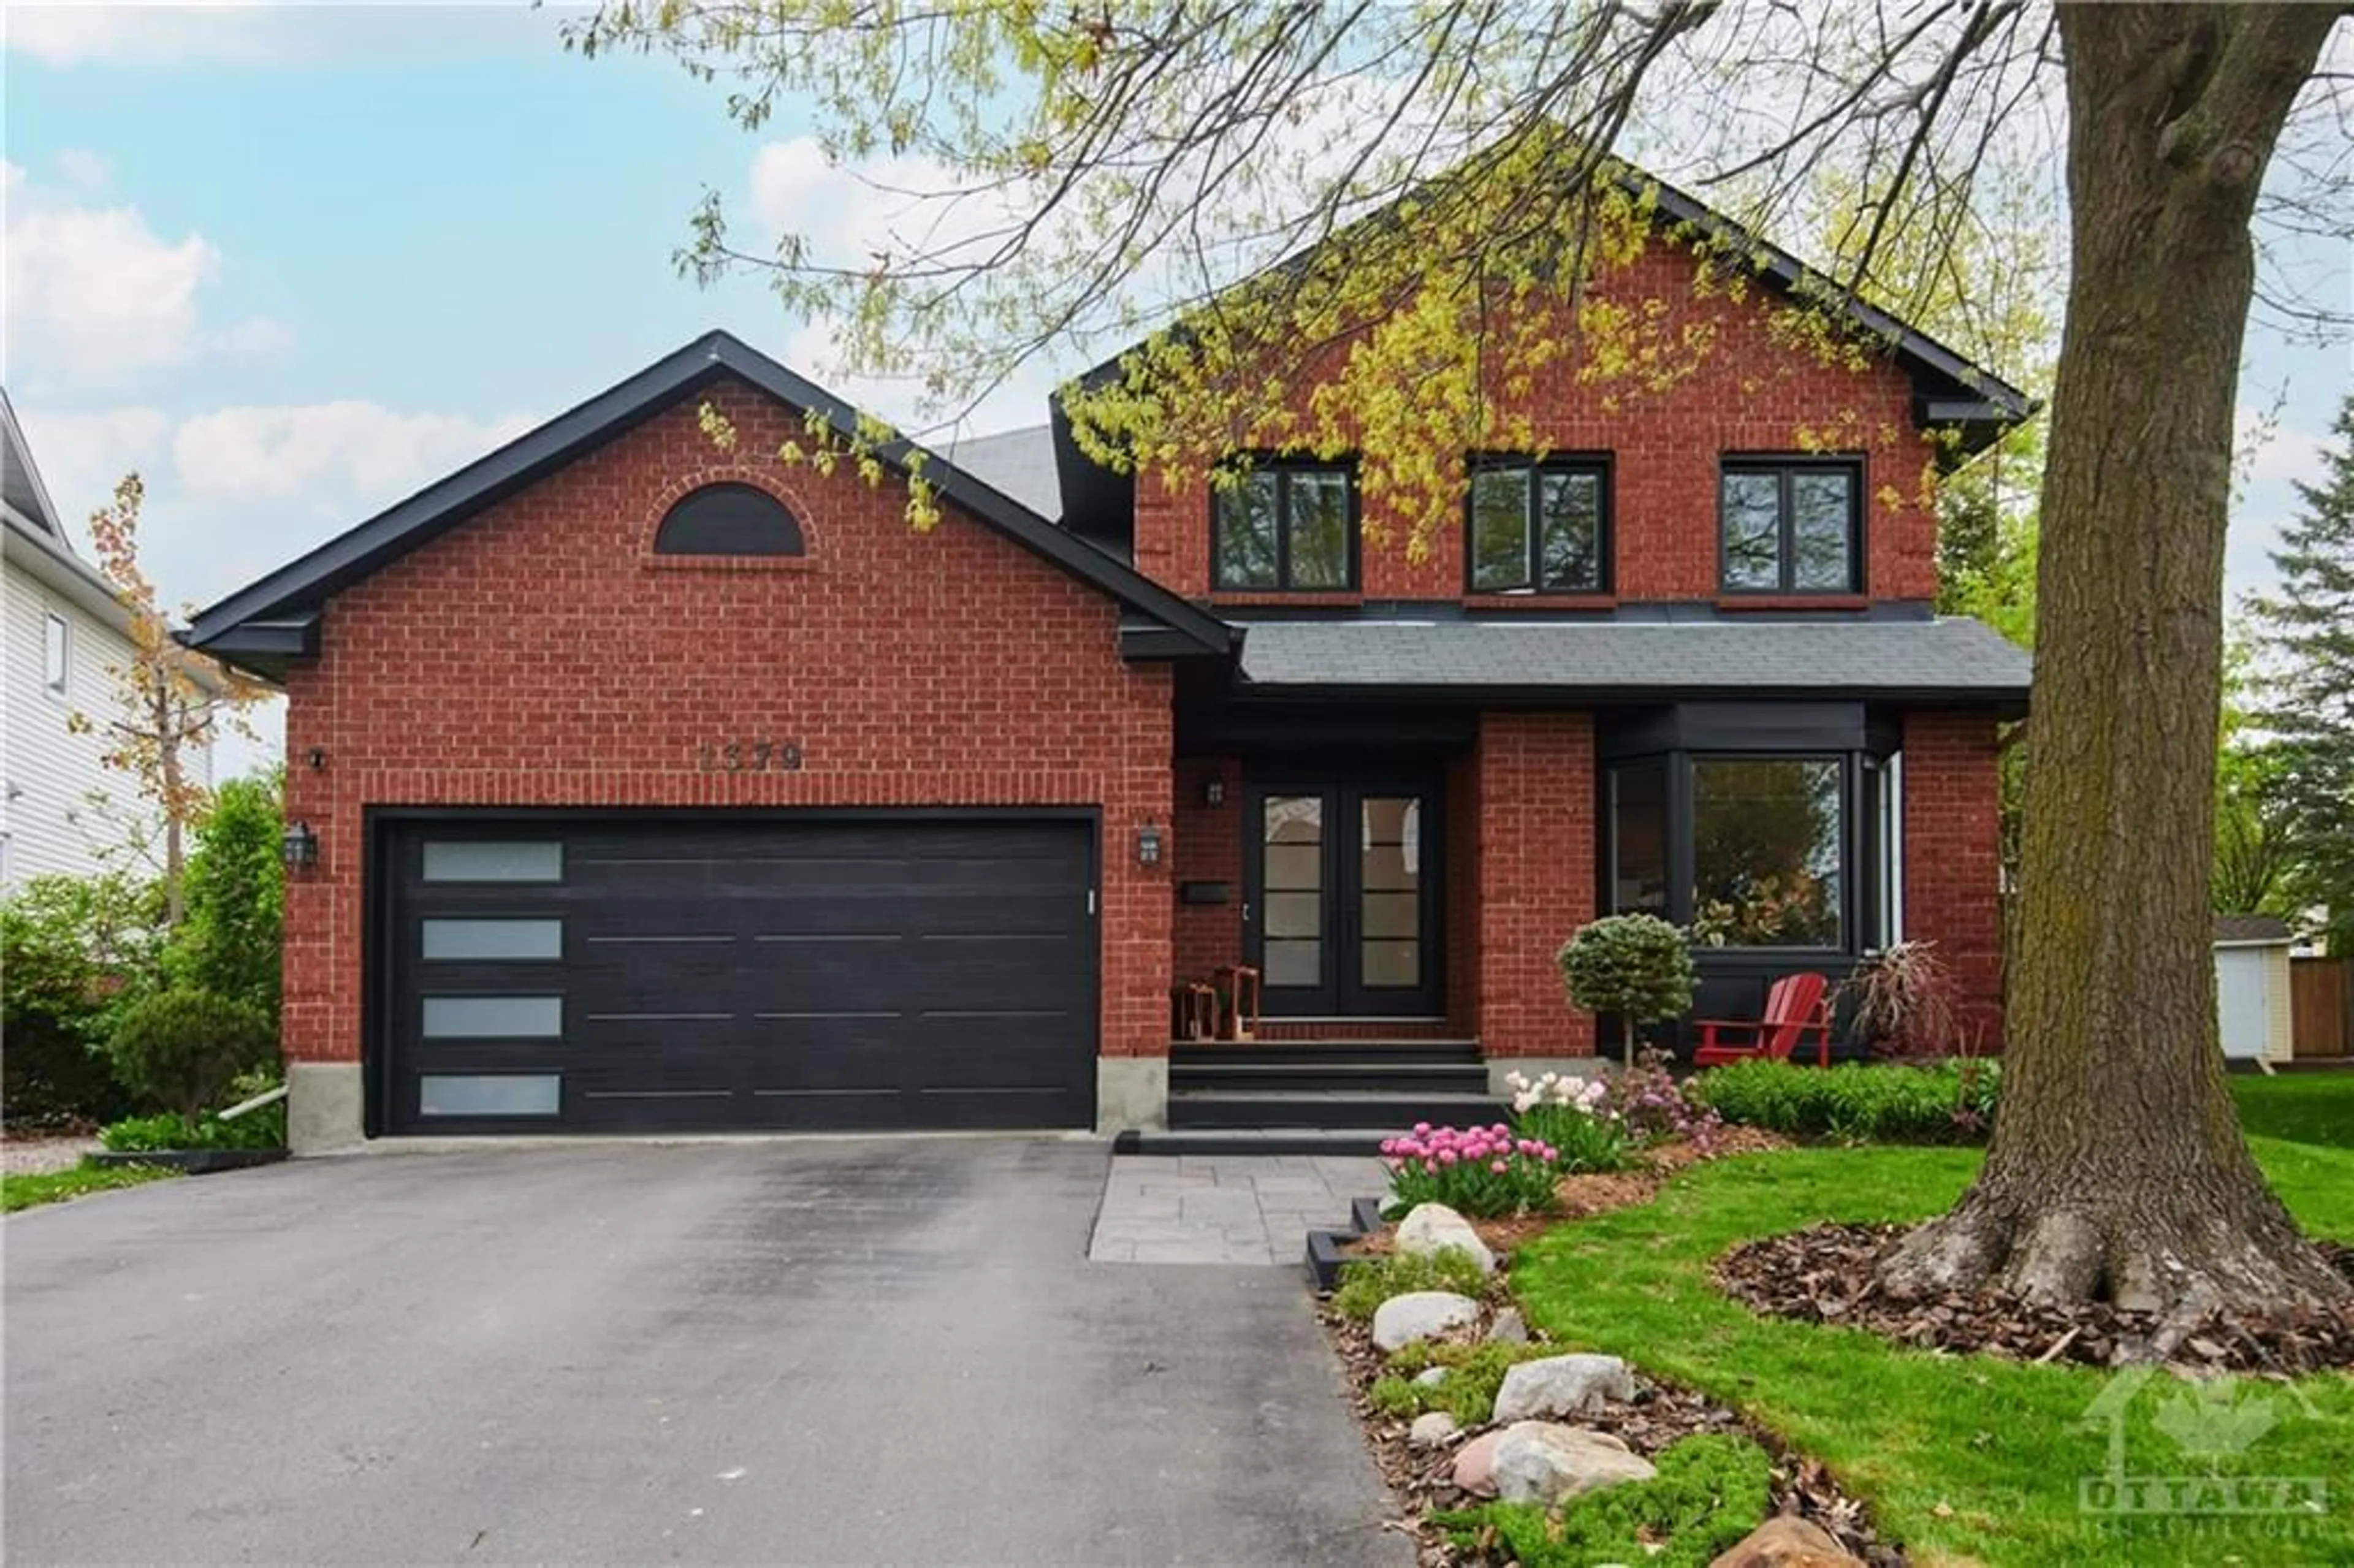 Home with brick exterior material for 1379 MONTRESOR Way, Ottawa Ontario K4A 3C3